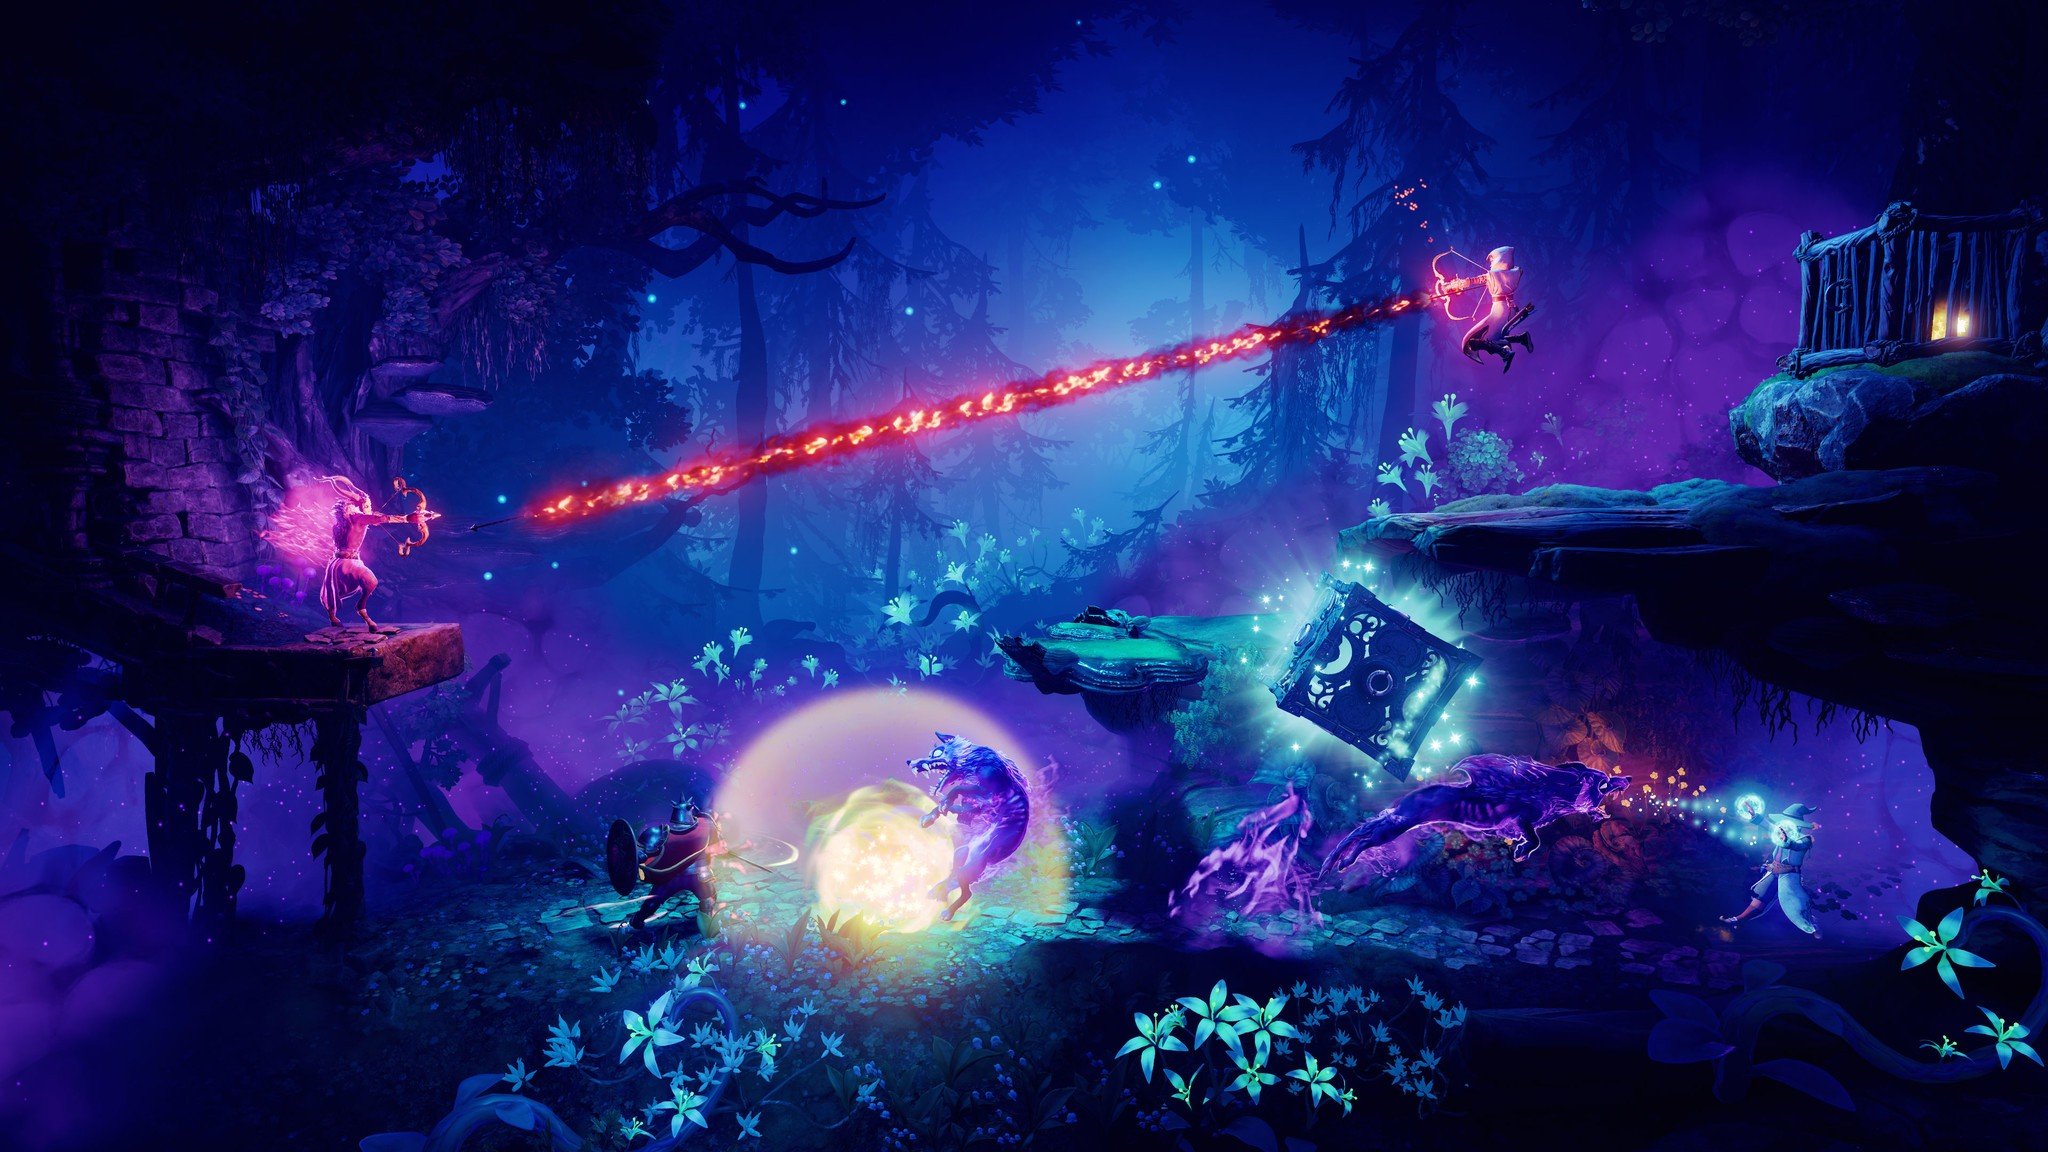 Trine 4: The Nightmare Prince Wallpapers